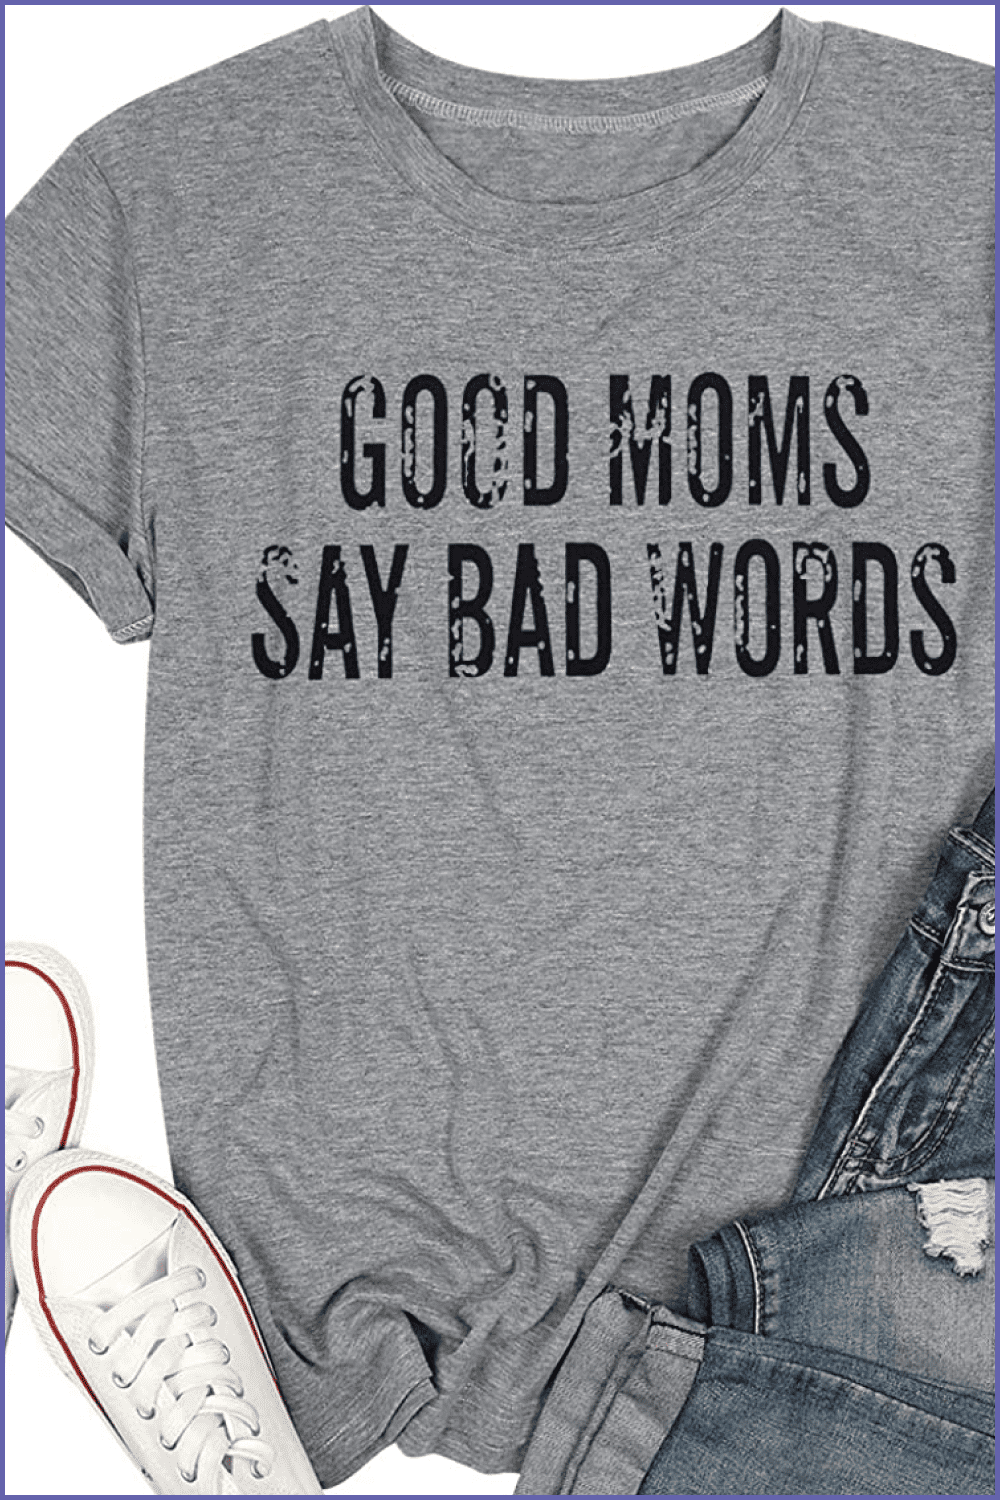 Gray T-shirt with black lettering Good Mom Say Bad Words.